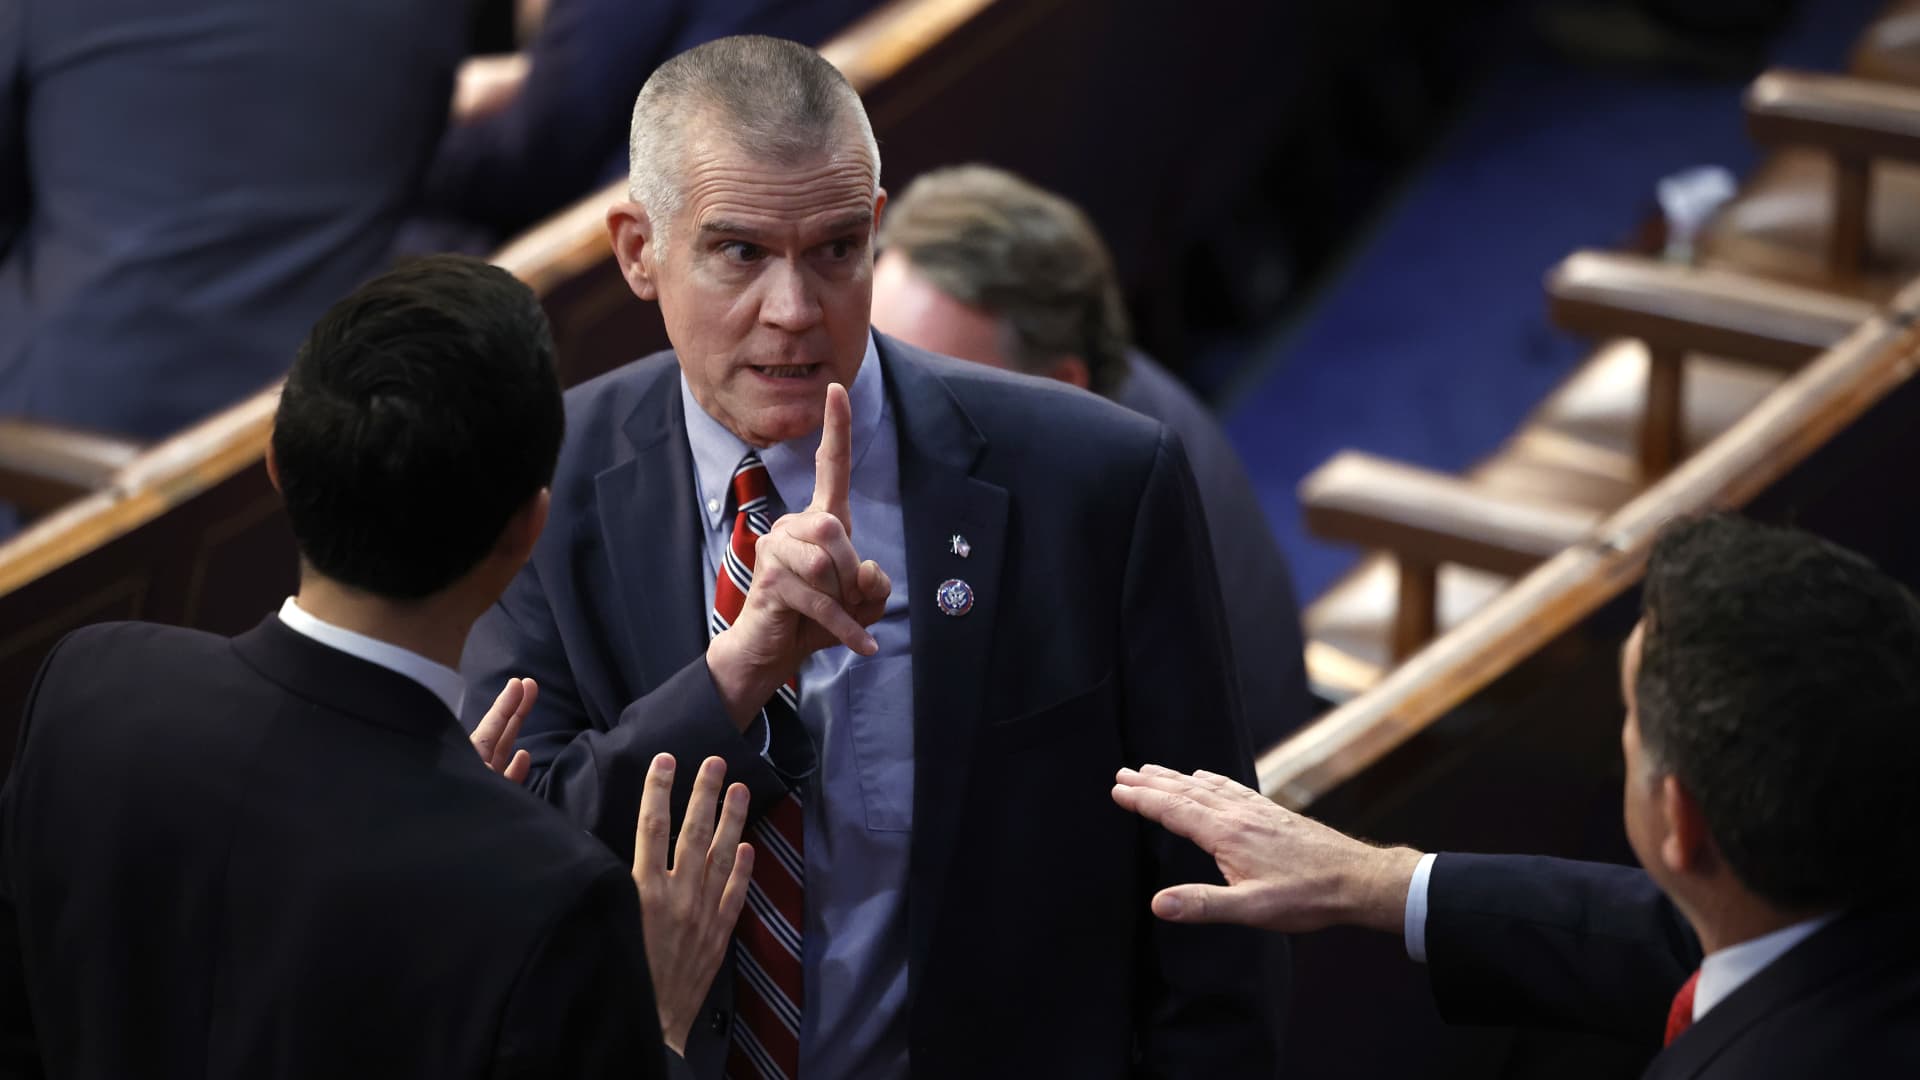 WASHINGTON, DC - JANUARY 06: U.S. Rep.-elect Matt Rosendale(R-MT) (C) talks to Rep.-elect Mark Green (R-TN) (R) and John Leganski, Deputy Chief of Staff for House Republican Leader Kevin McCarthy (R-CA), in the House Chamber during the fourth day of elections for Speaker of the House at the U.S. Capitol Building on January 06, 2023 in Washington, DC. The House of Representatives is meeting to vote for the next Speaker after House Republican Leader Kevin McCarthy (R-CA) failed to earn more than 218 votes on several ballots; the first time in 100 years that the Speaker was not elected on the first ballot.(Photo by Chip Somodevilla/Getty Images)